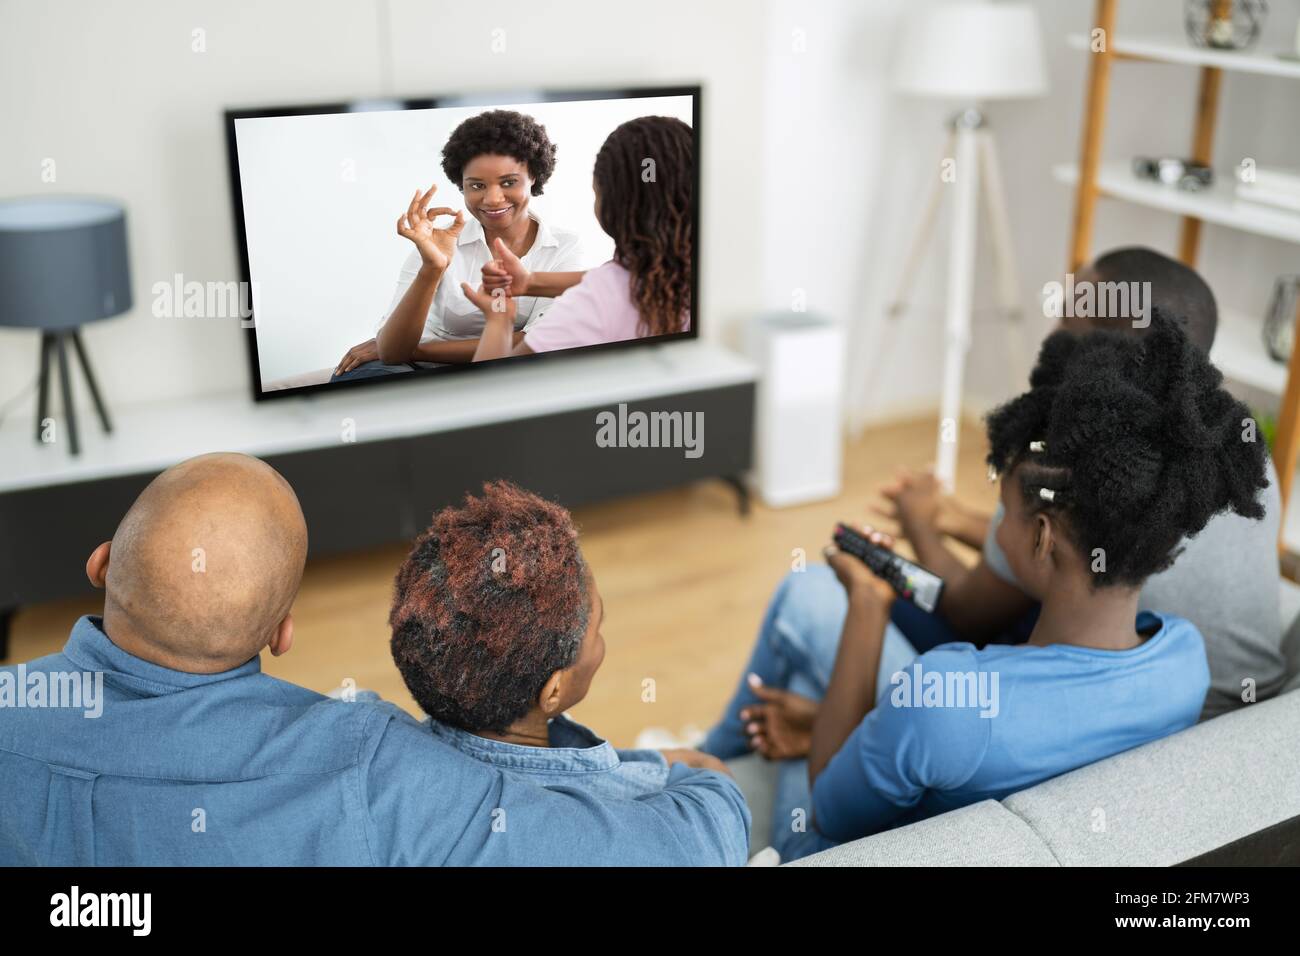 African Family Watching TV Movie On Television Stock Photo - Alamy